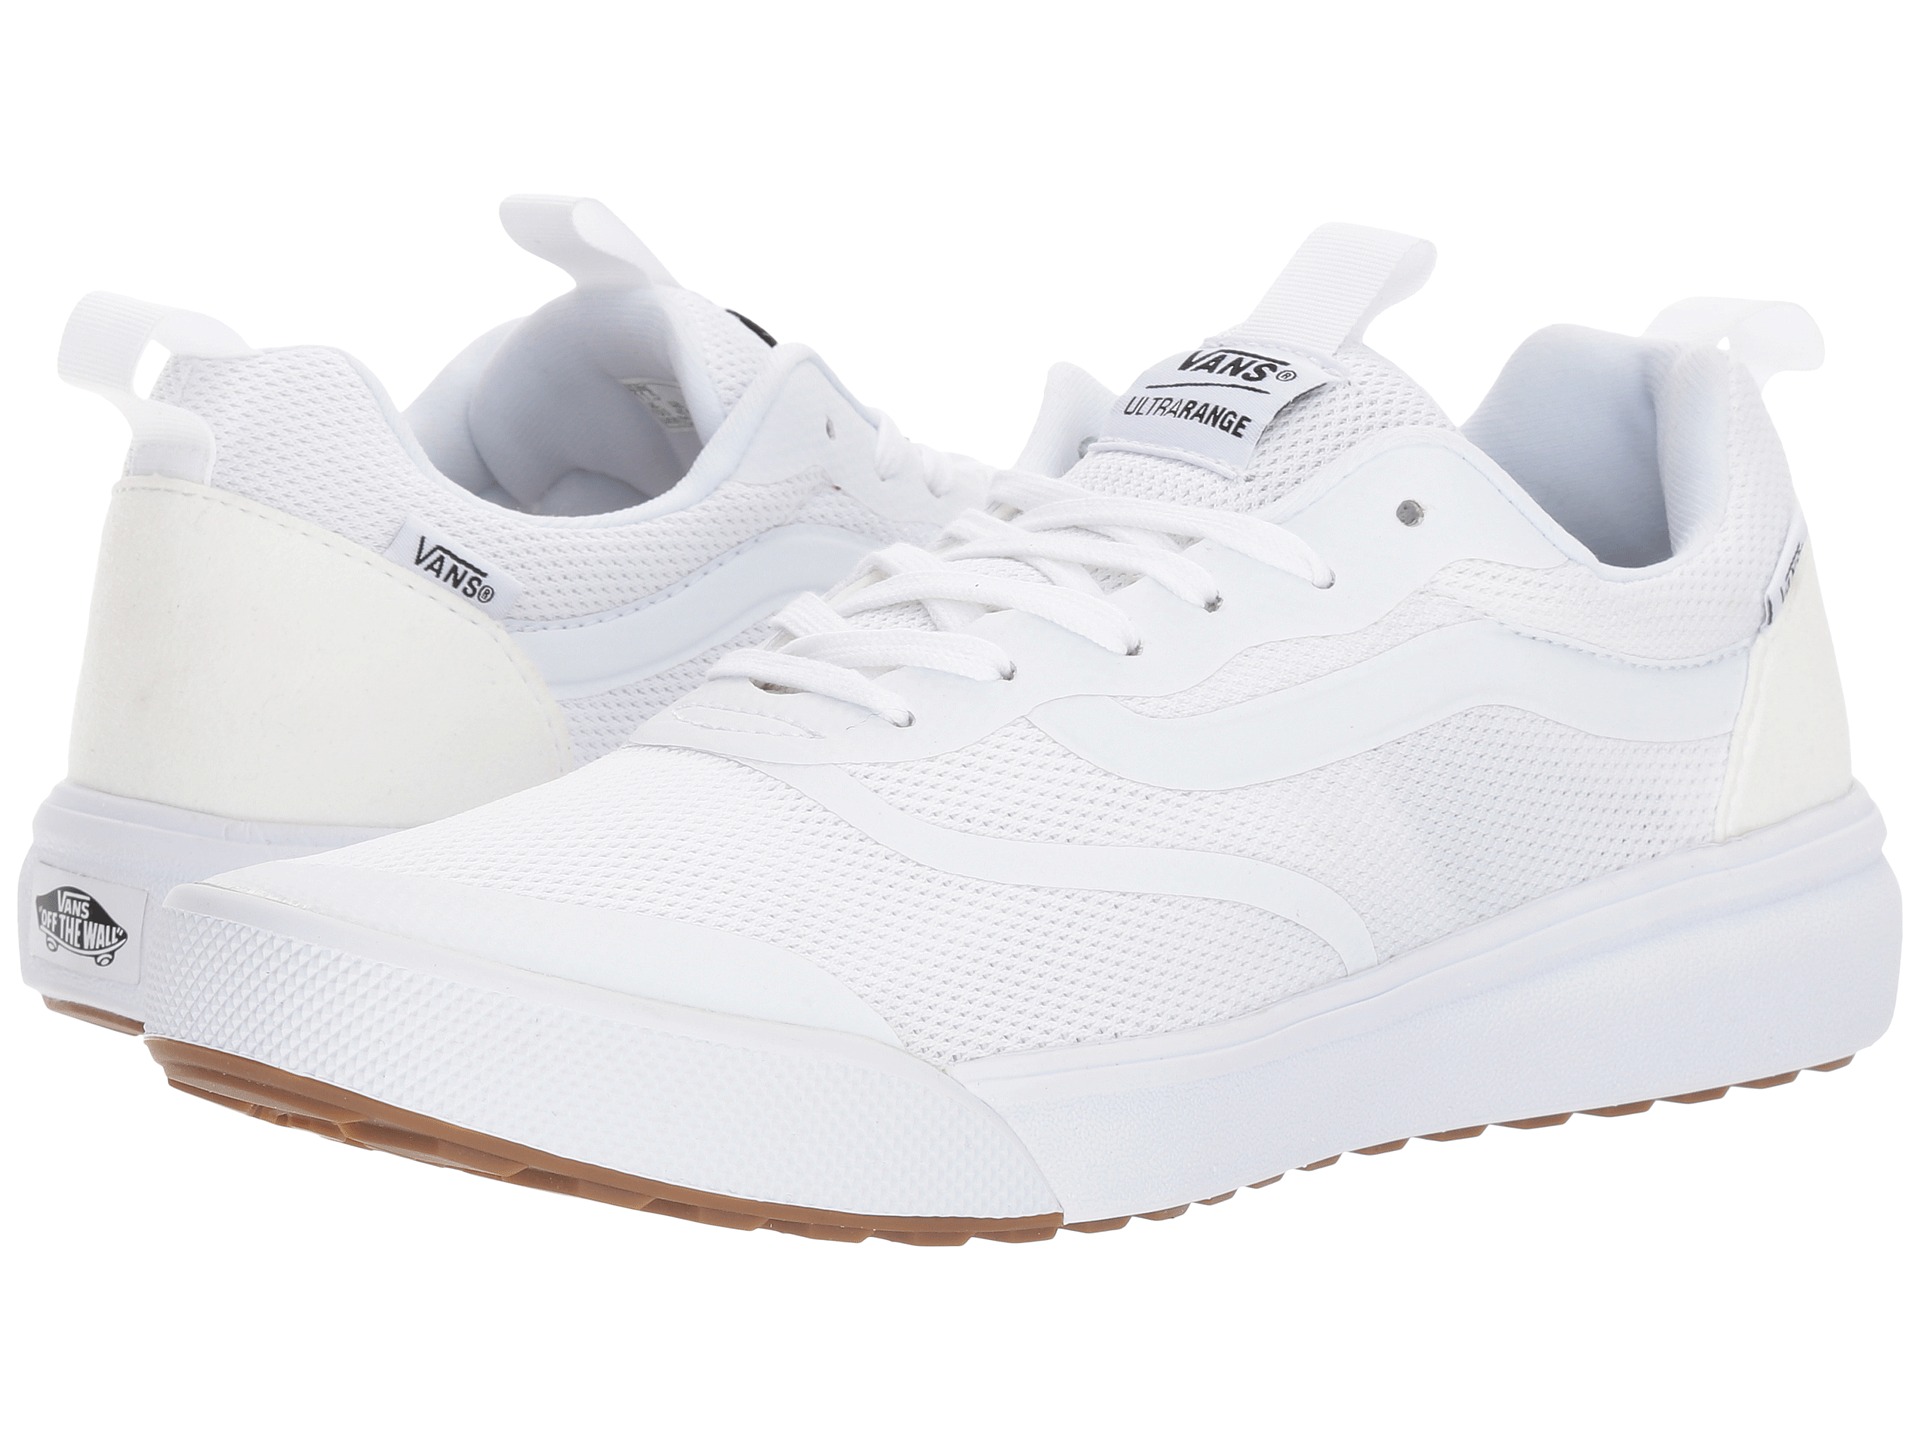 Vans Ultrarange - Golf Style and Accessories -